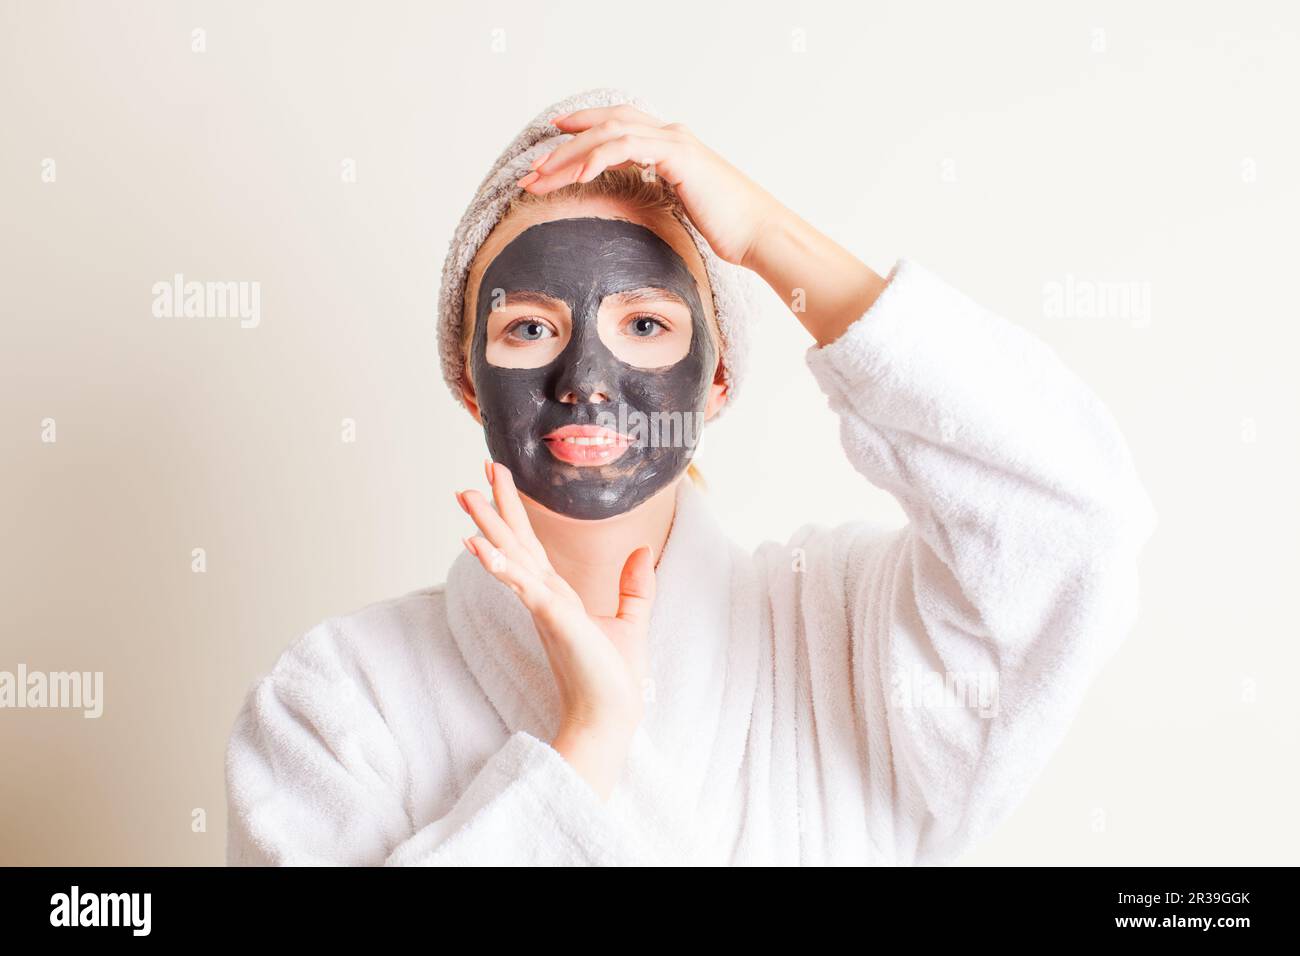 Woman at skincare cleansing procedure at cosmetology salon Stock Photo